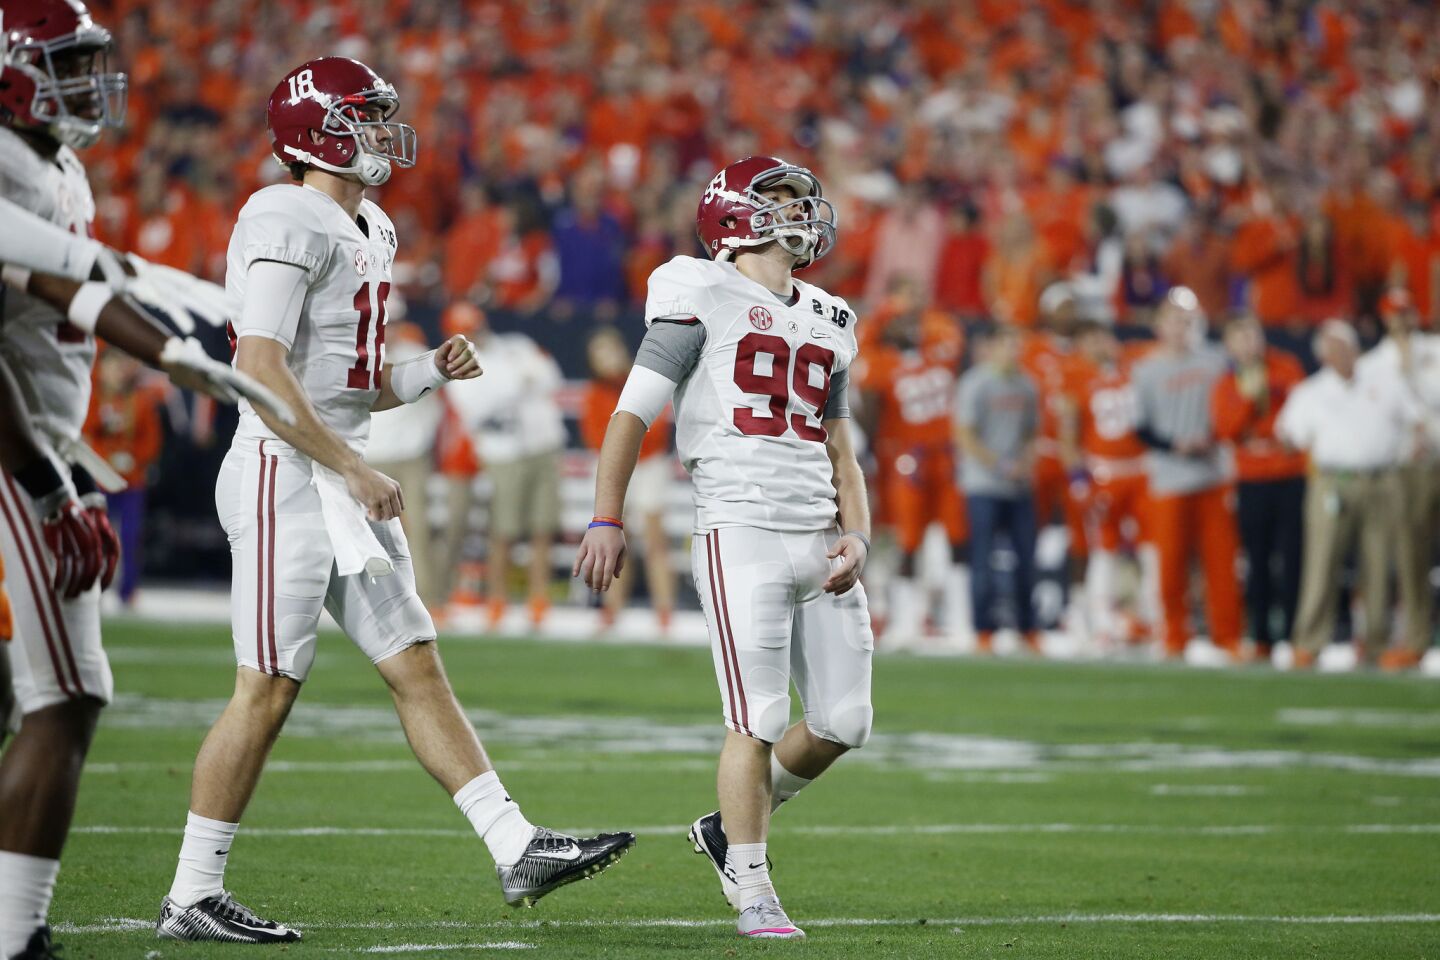 Alabama kicker Adam Griffith (99) reacts after missing a 44-yard field goal in the first quarter.